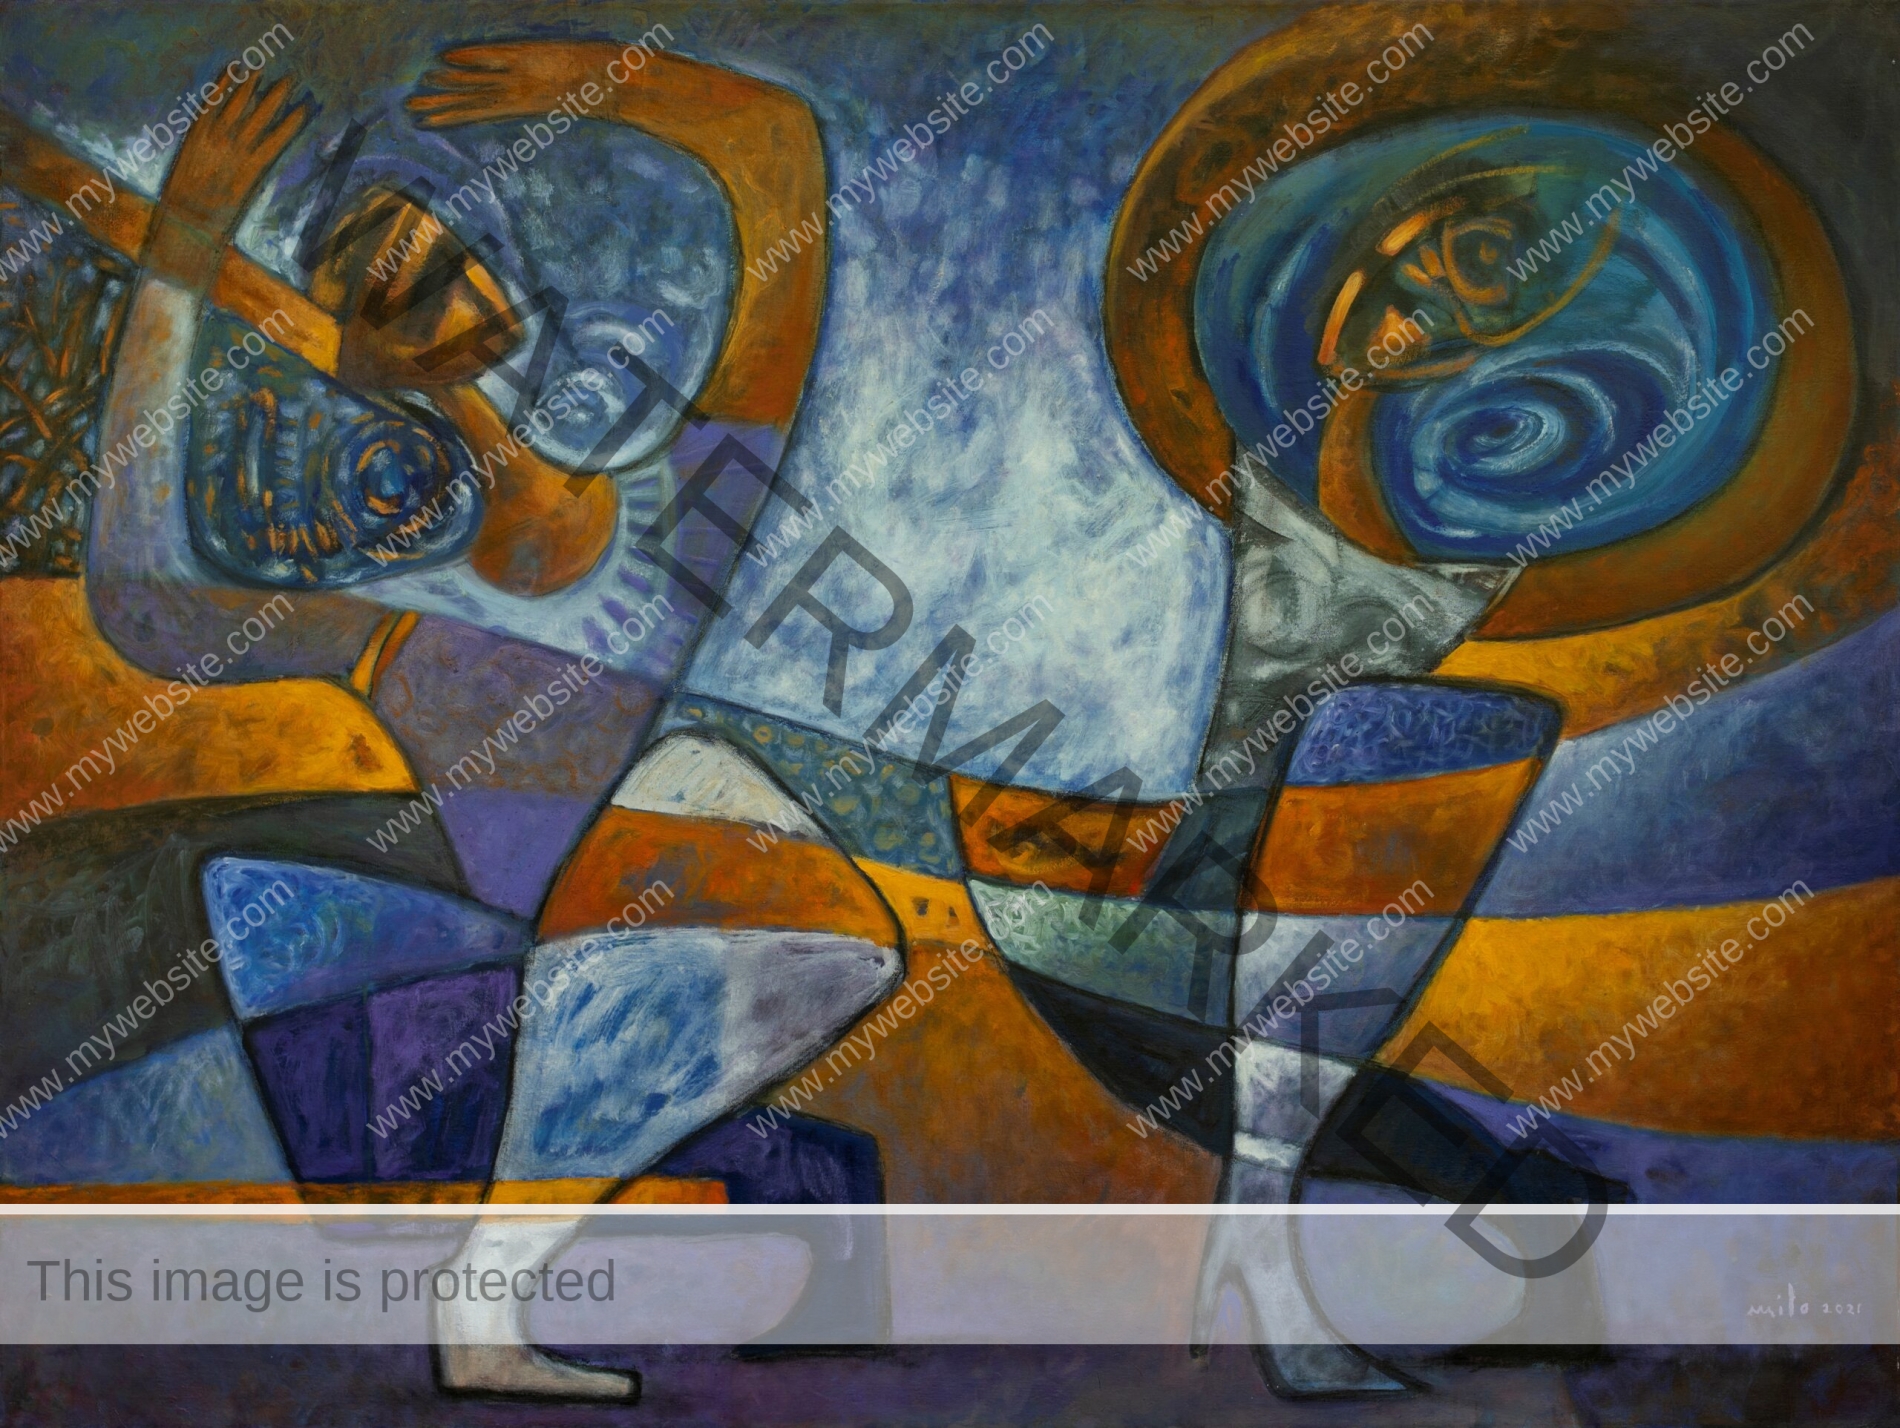 Pas de Deux painting by Milo Gonzalez depicting two figures engaged in a typical ballet duet. Bold colours of blue and orange, with swirling circular shapes represent movement and energy.